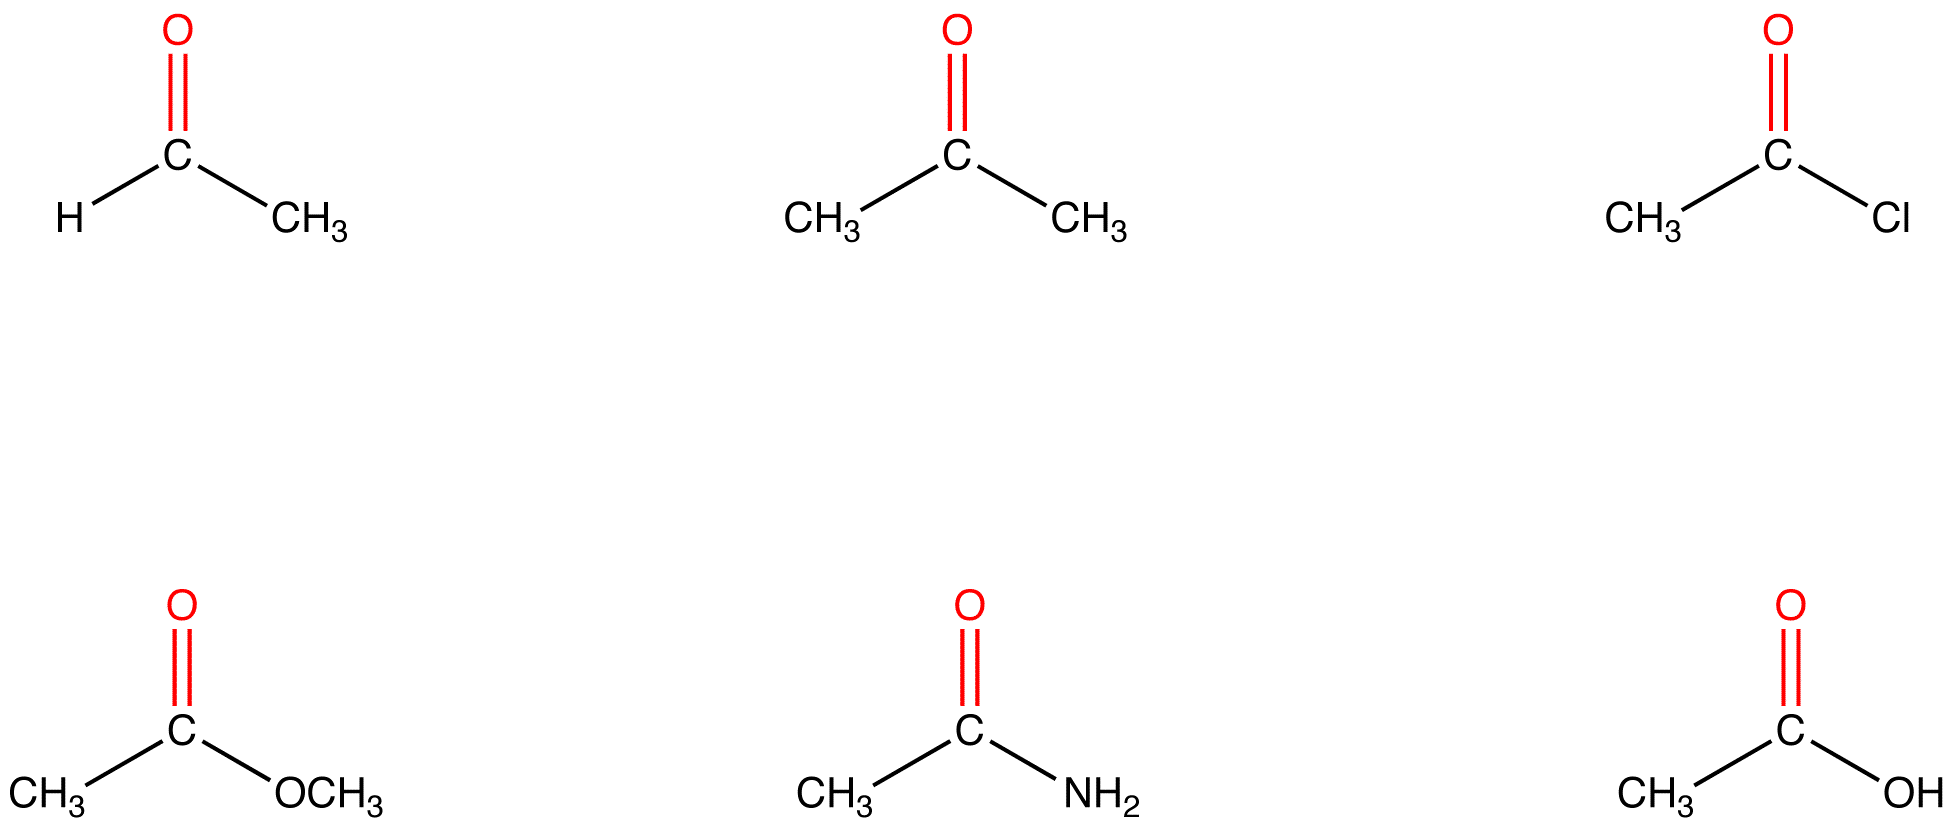 carbonylgroup1.png